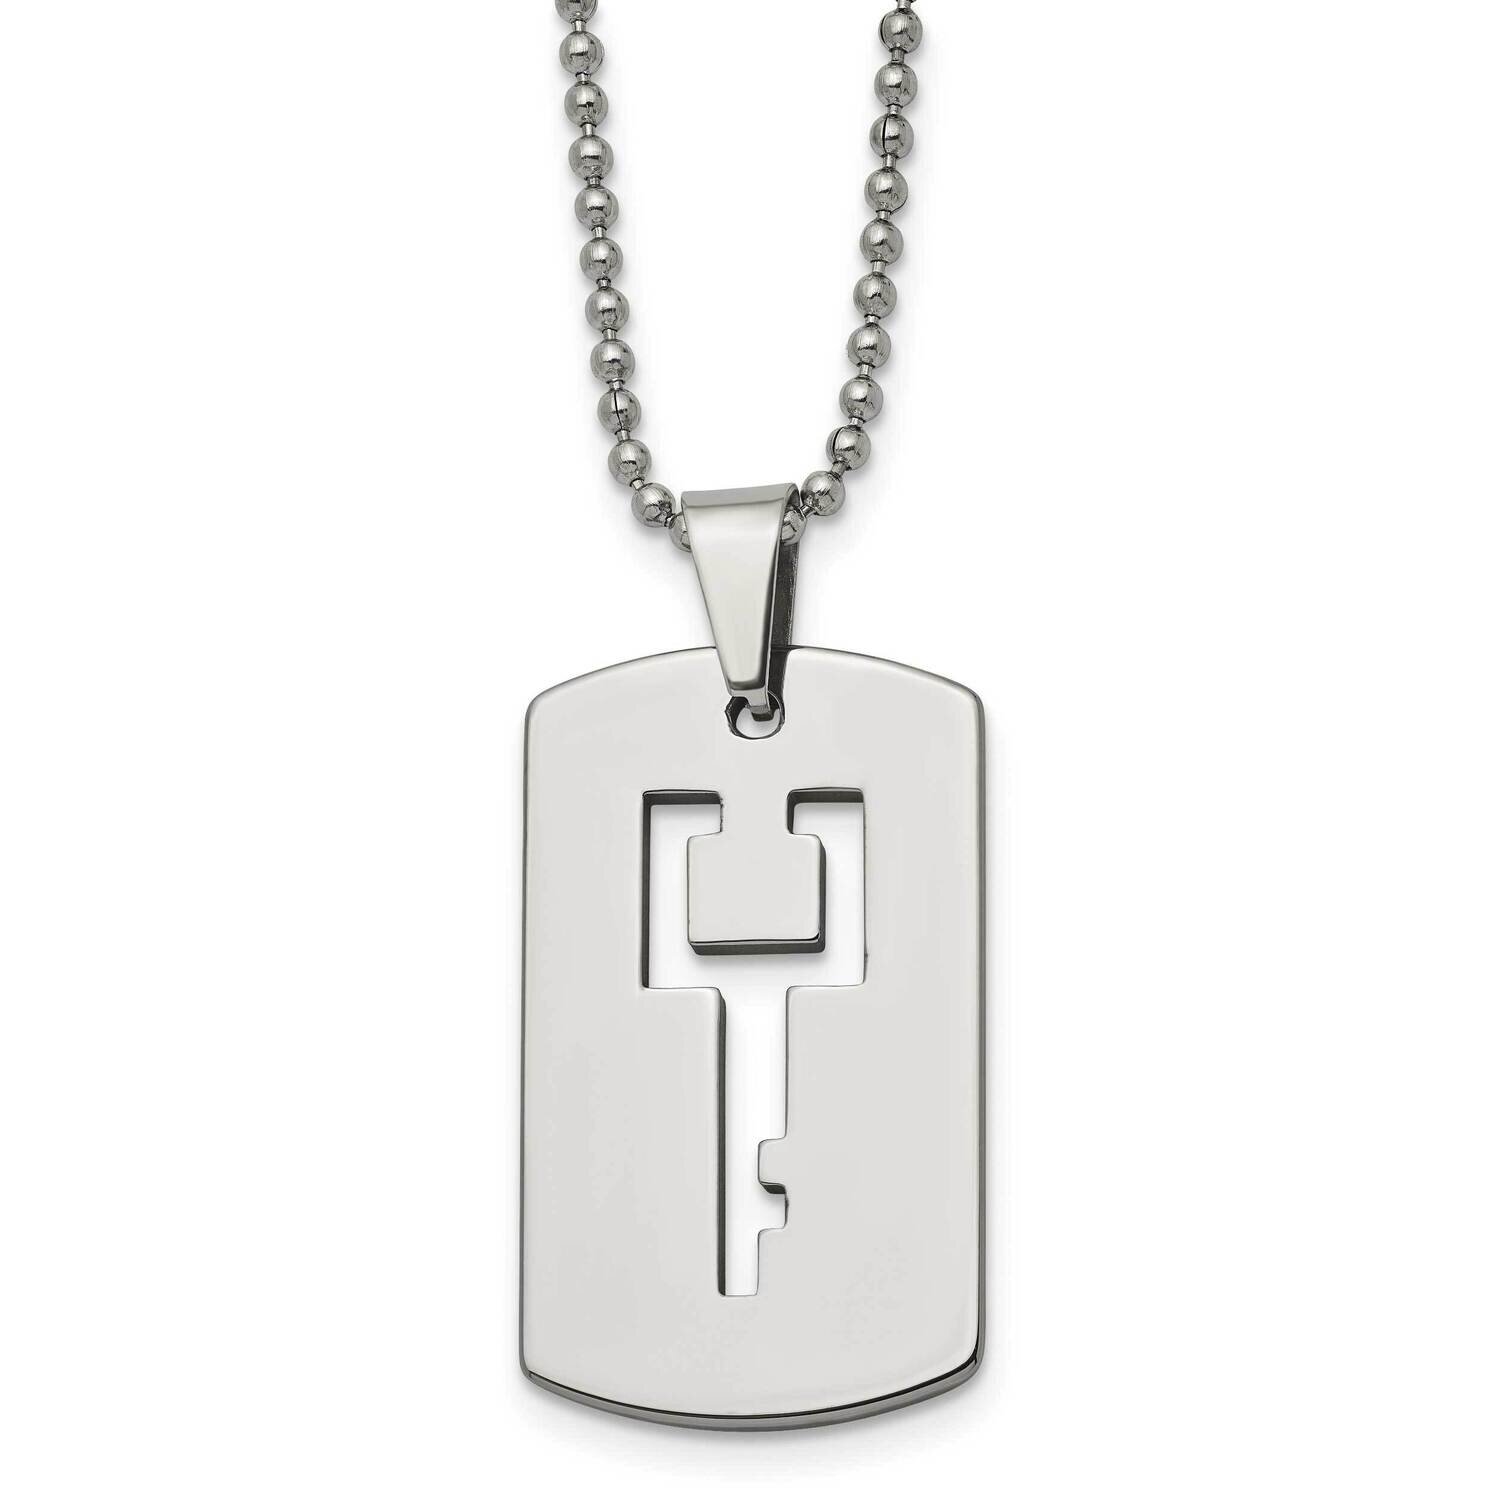 Tungsten Polished Dog Tag with Key Cut-Out 22 Inch Necklace TUN111-22